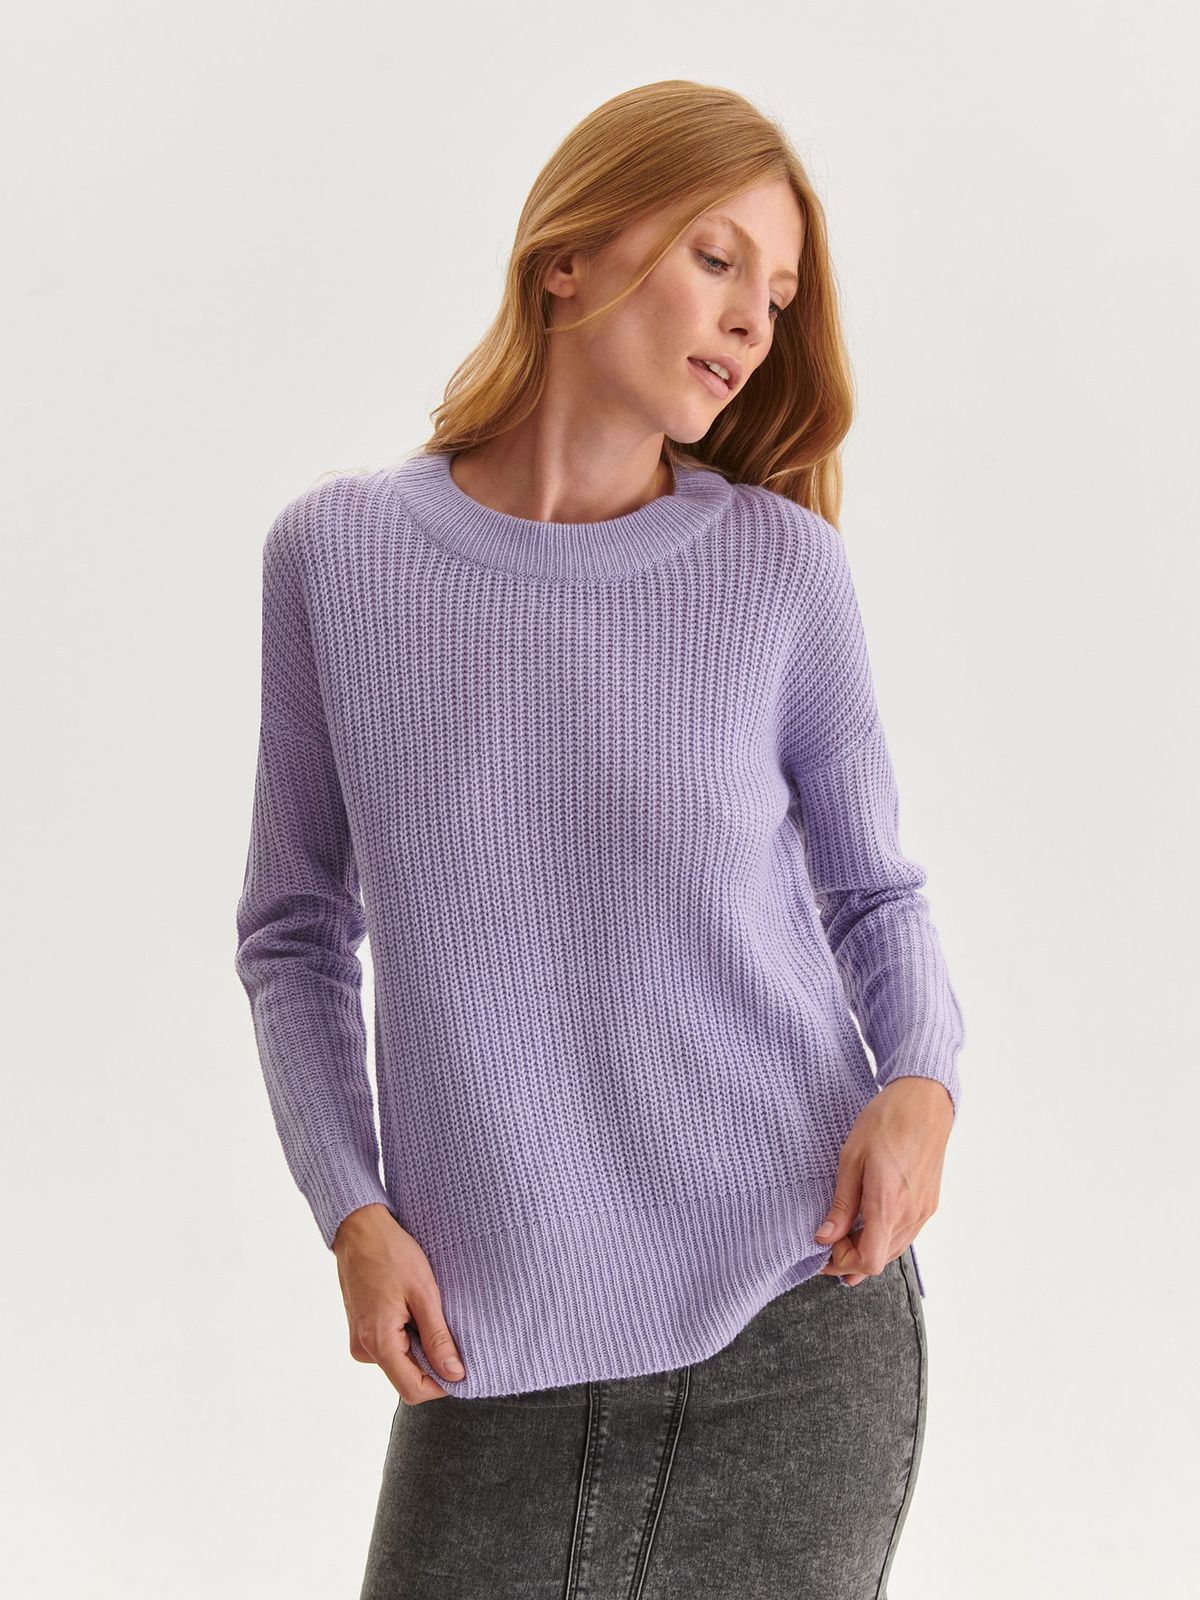 Lila sweater knitted loose fit